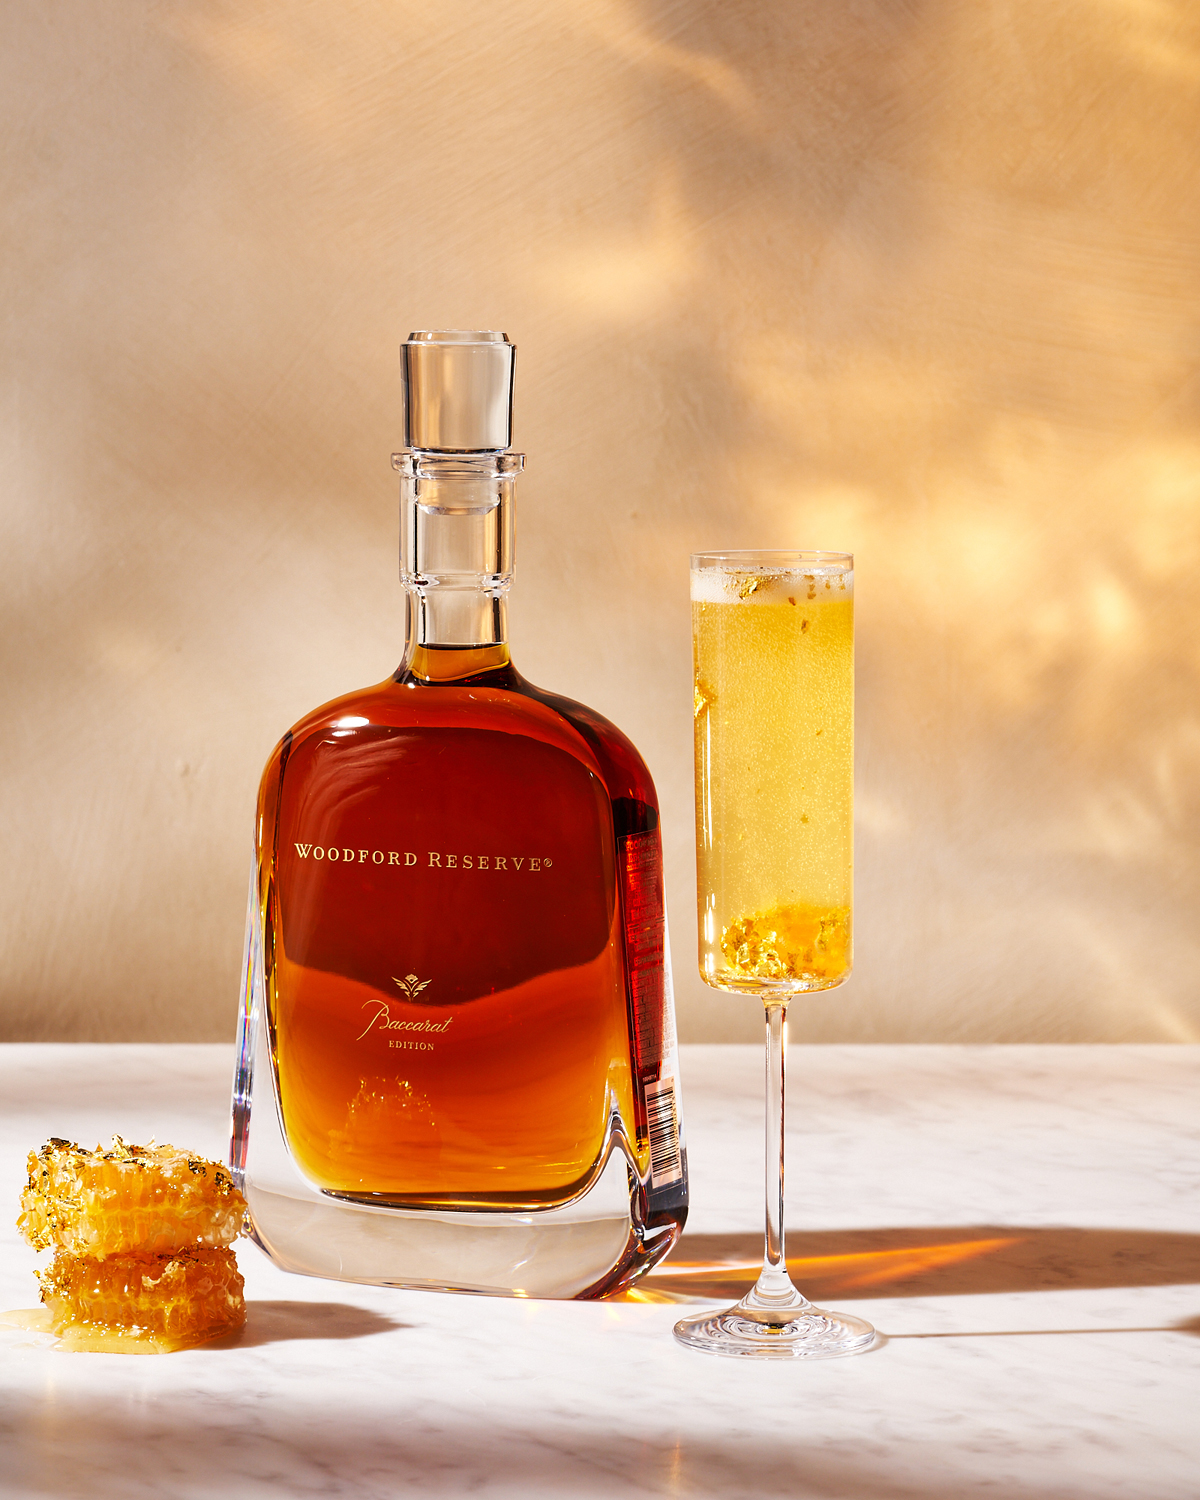 03_09_23_Woodford_Reserve_French_170_Baccarat_7266